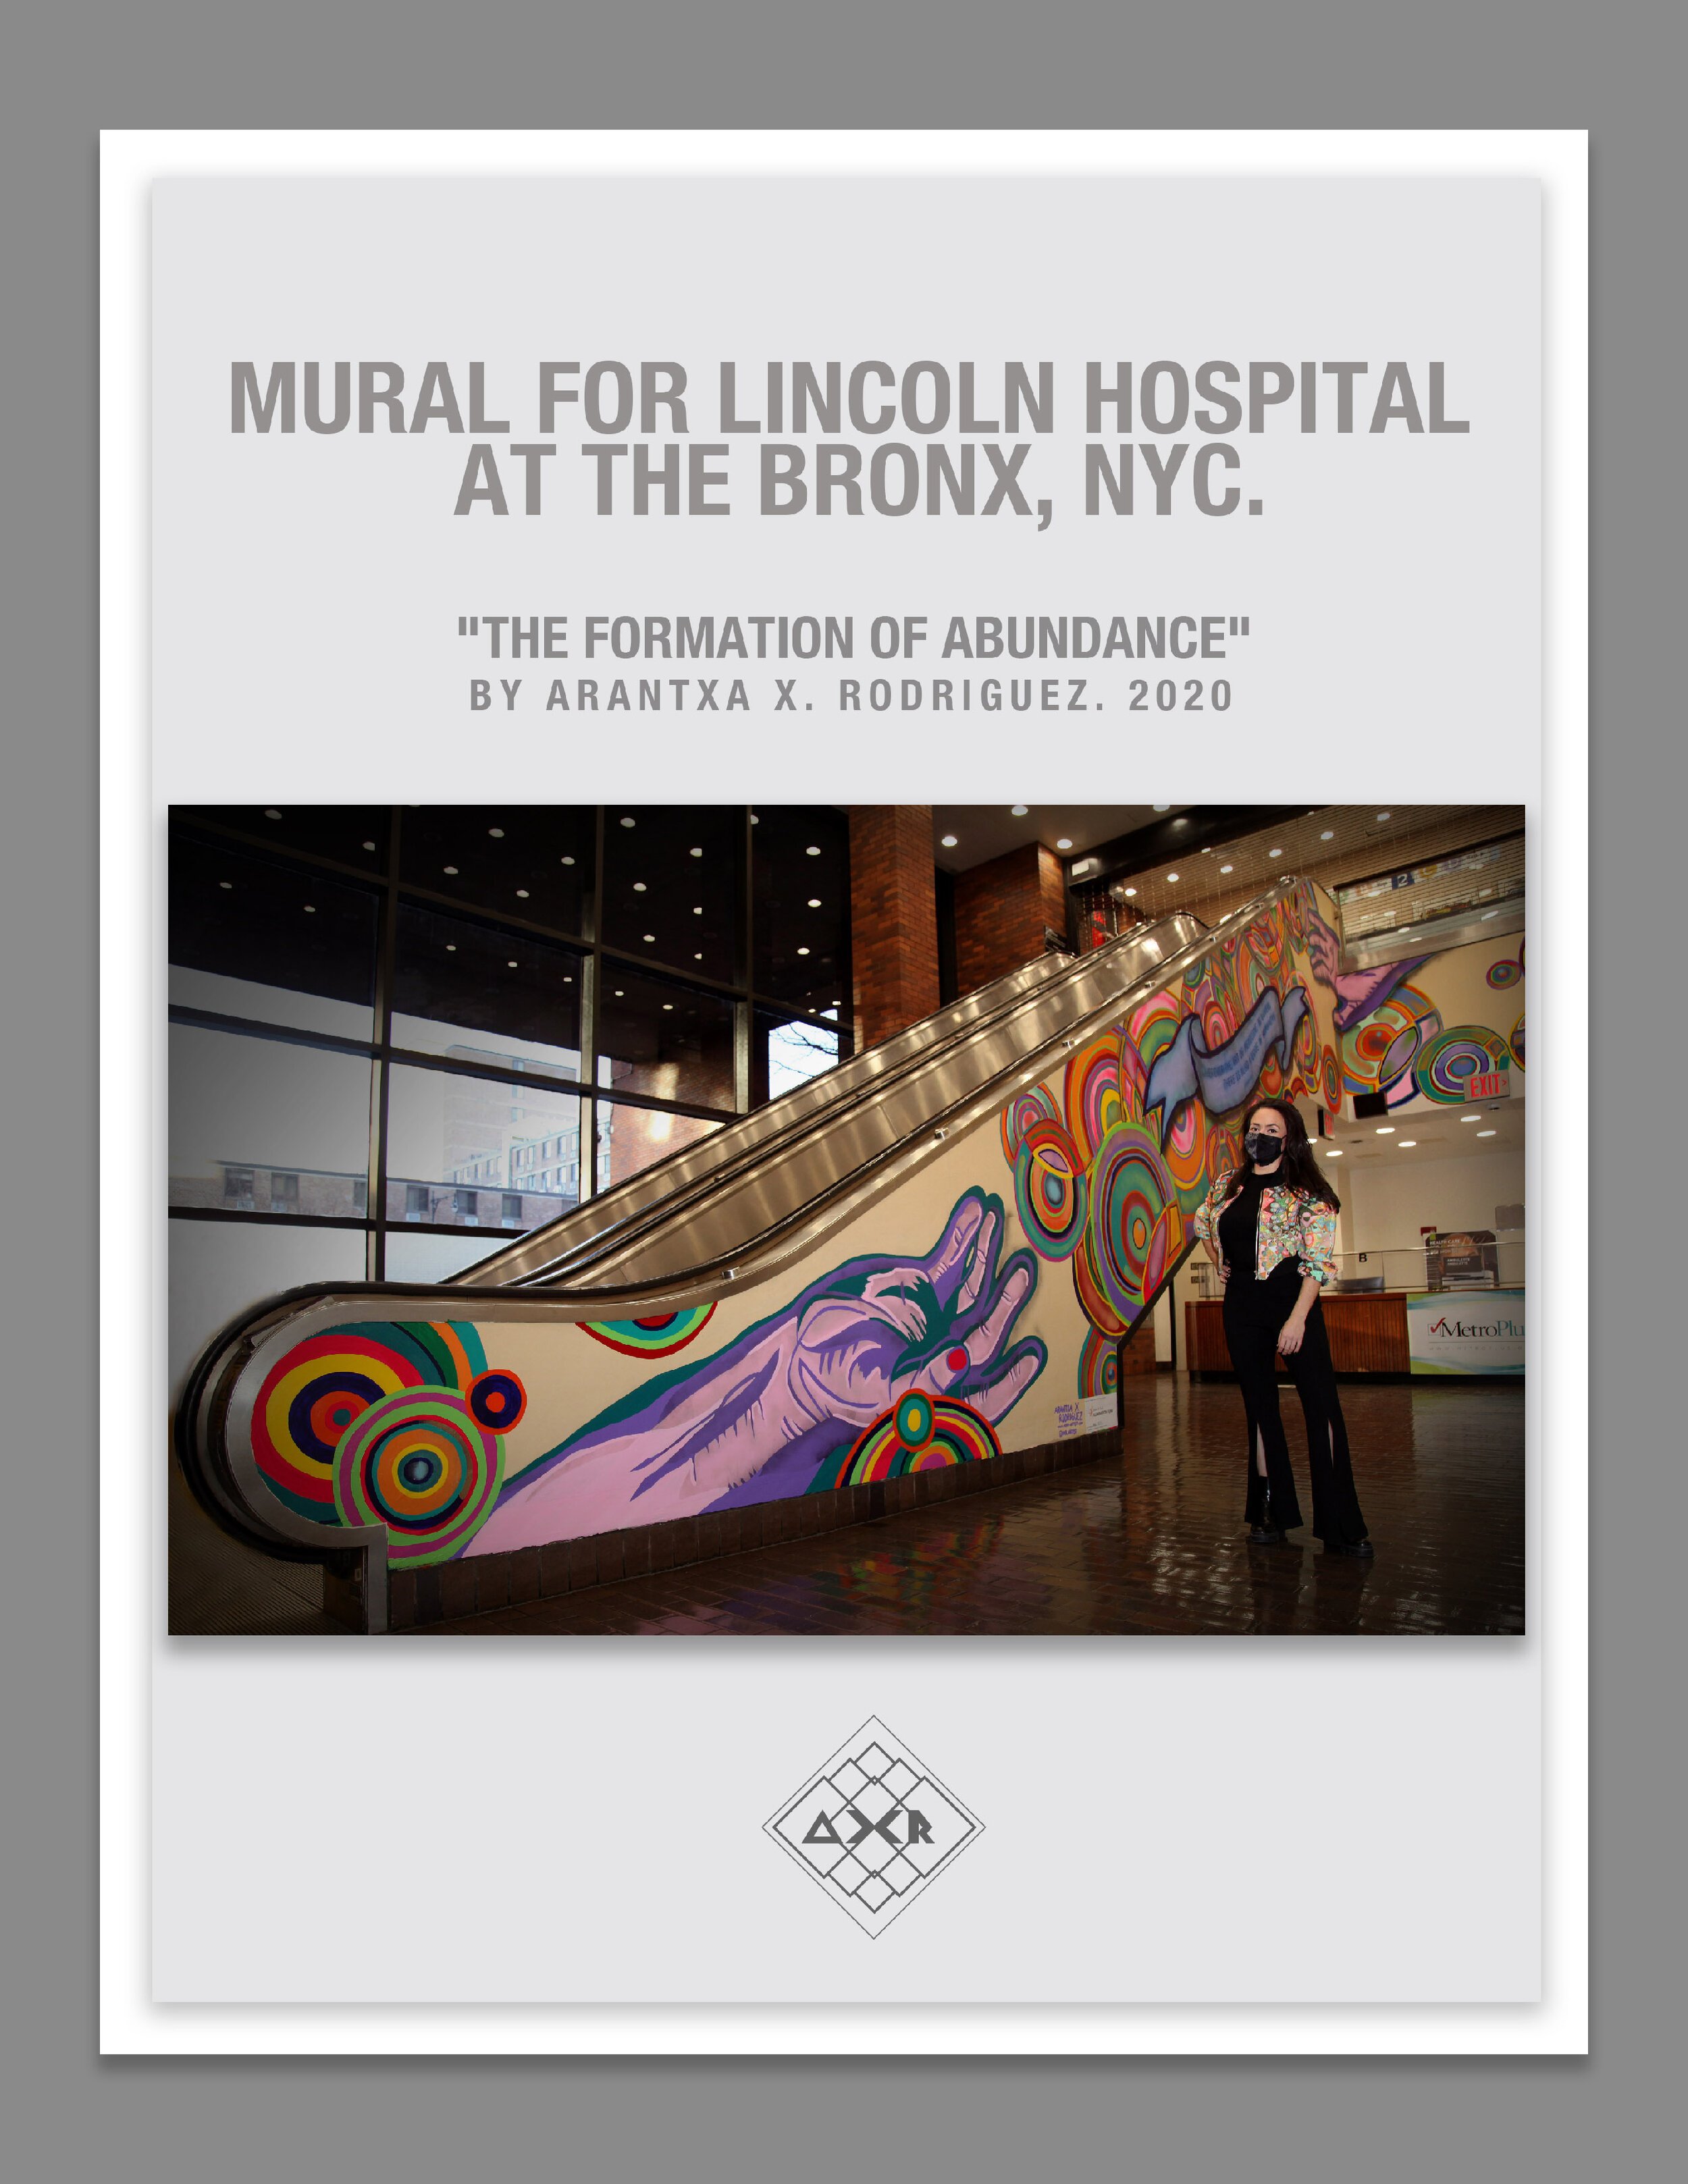 MURAL FOR LINCOLN HOSPITAL AT THE BRONX, NYC.